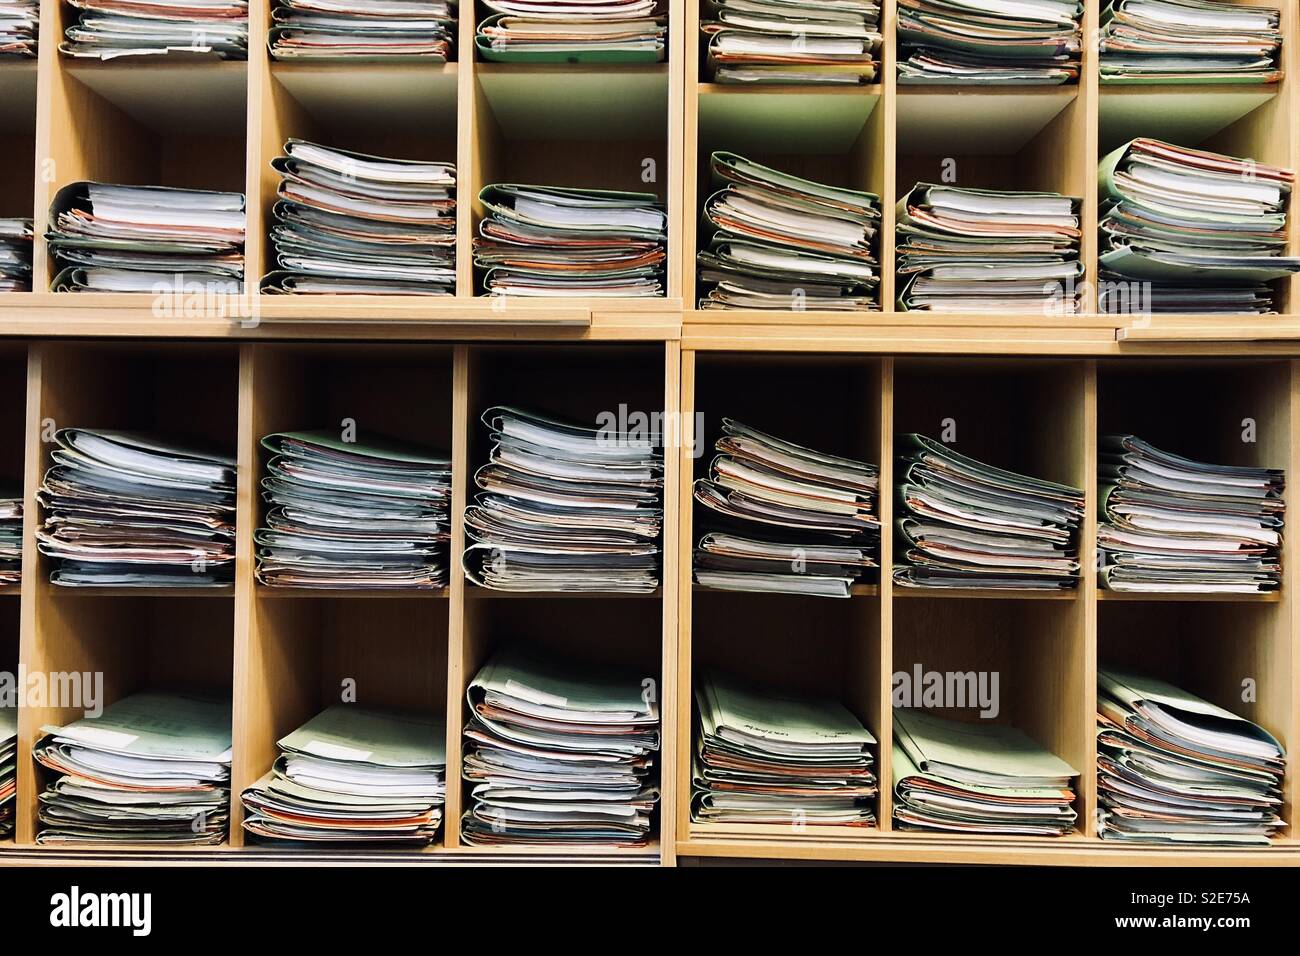 Stacks of documents lying in a shelf of an office. Stock Photo